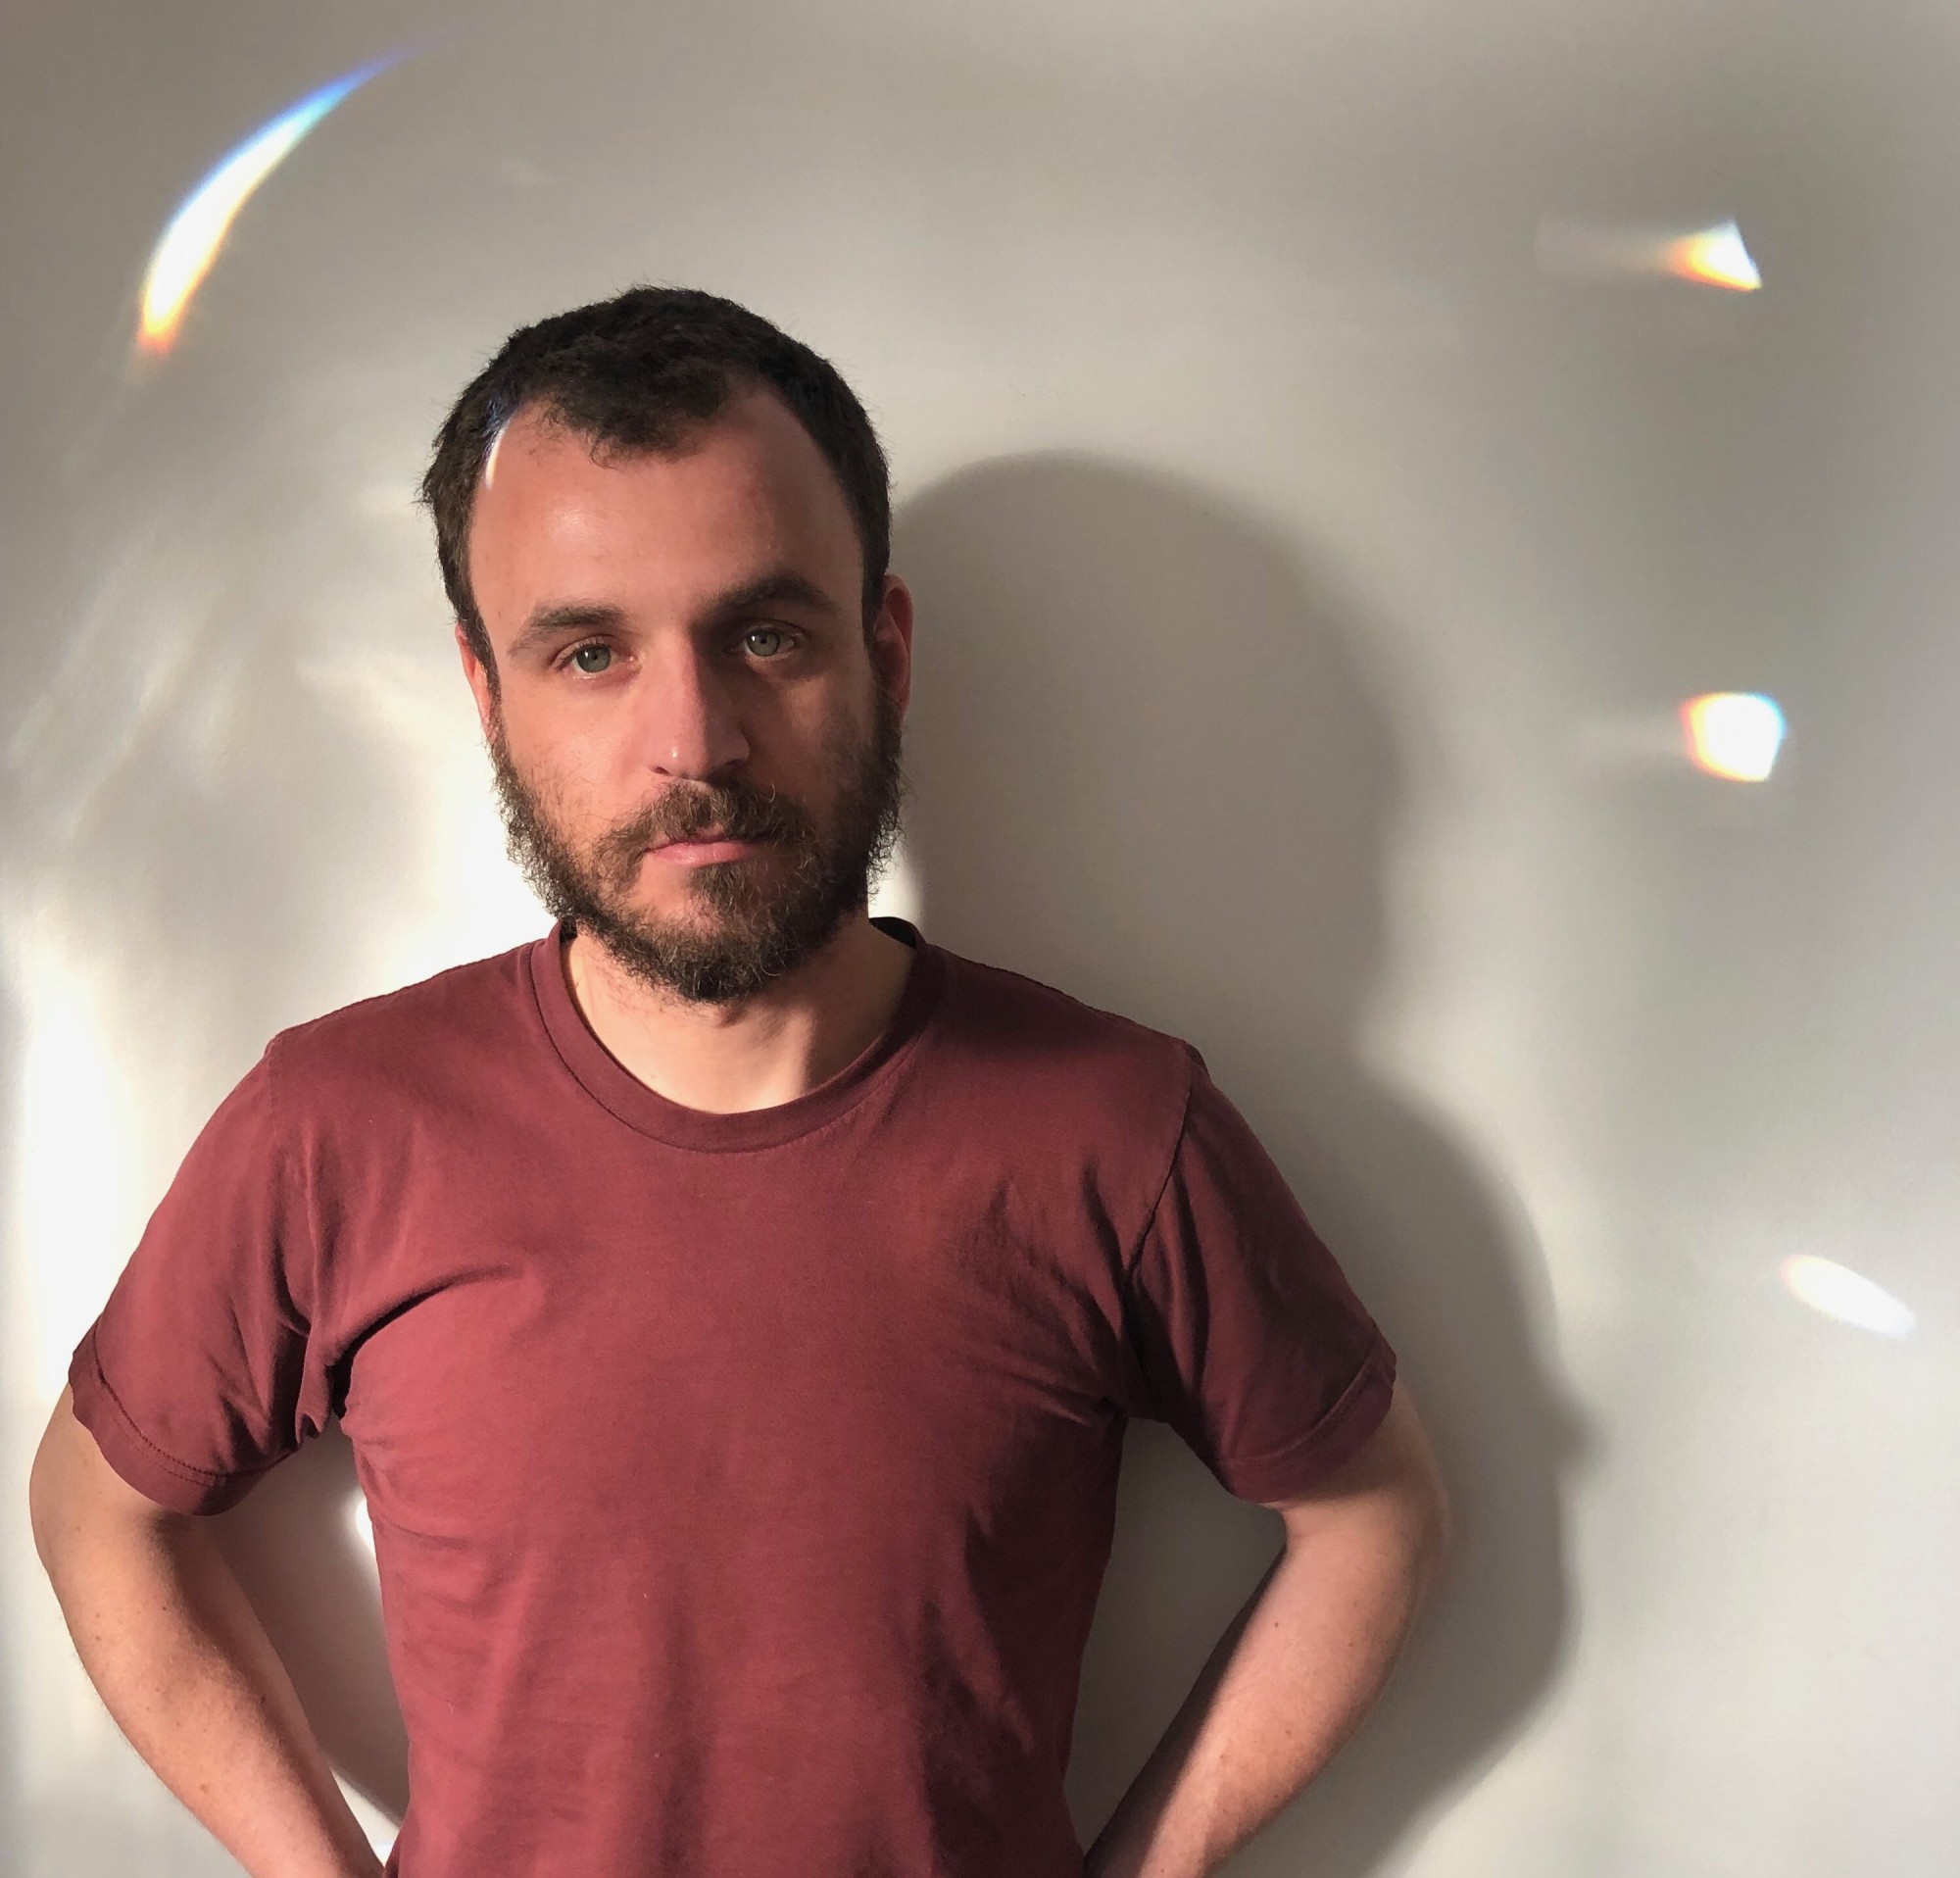 Josef Kaplan stands in a red t-shirt in front of a white wall, dappled with refracted light, looking at the camera